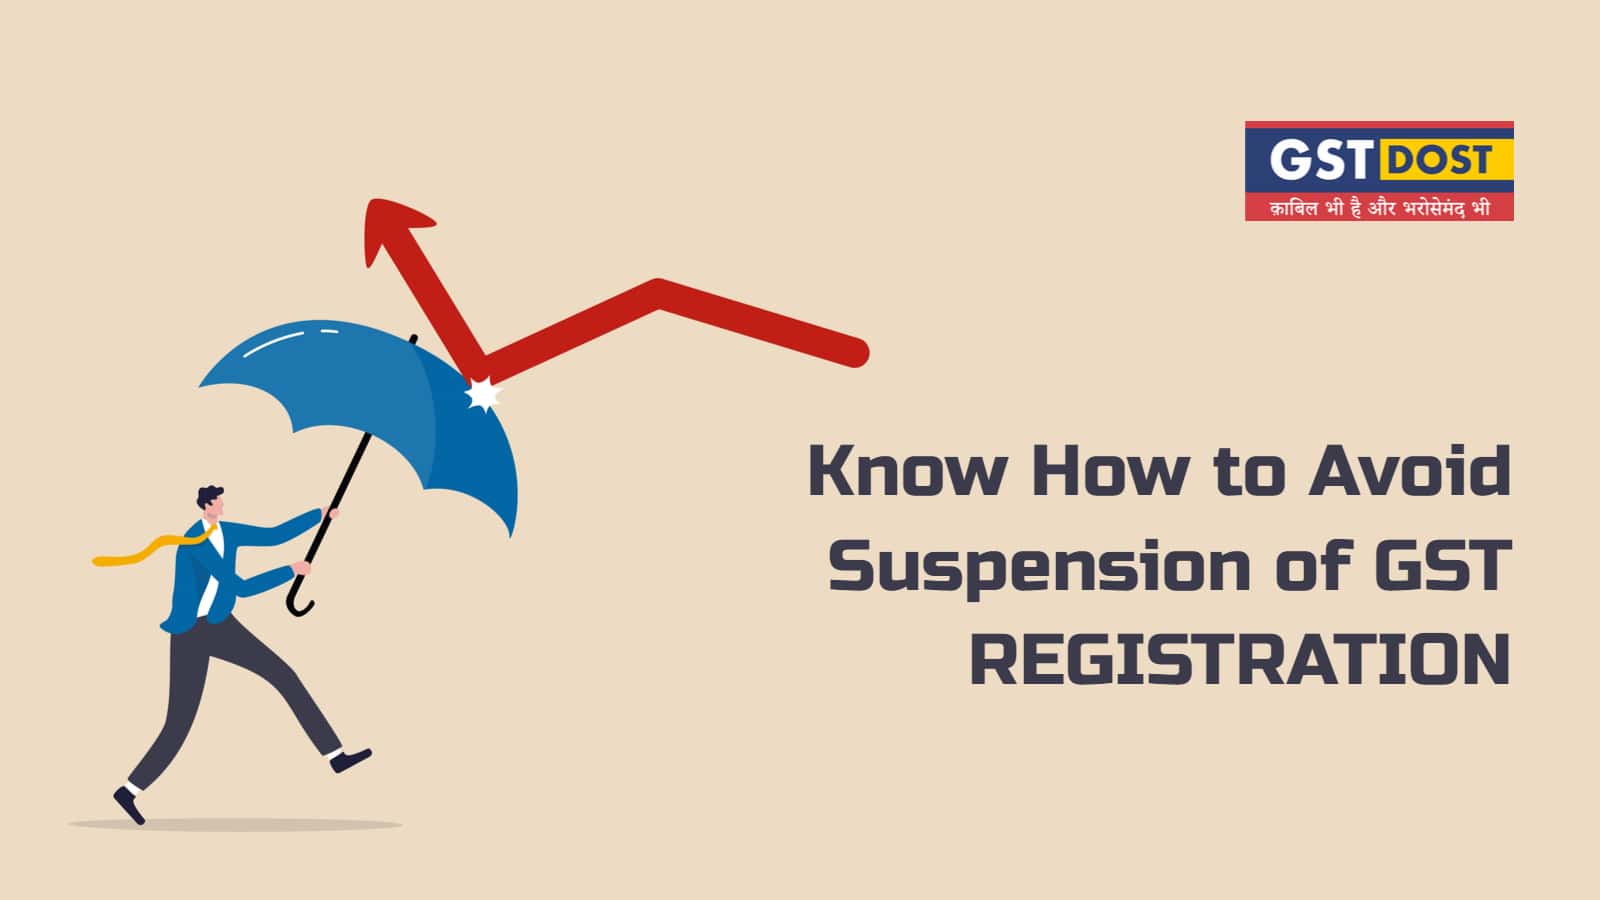 Know How to Avoid Suspension of GST Registration